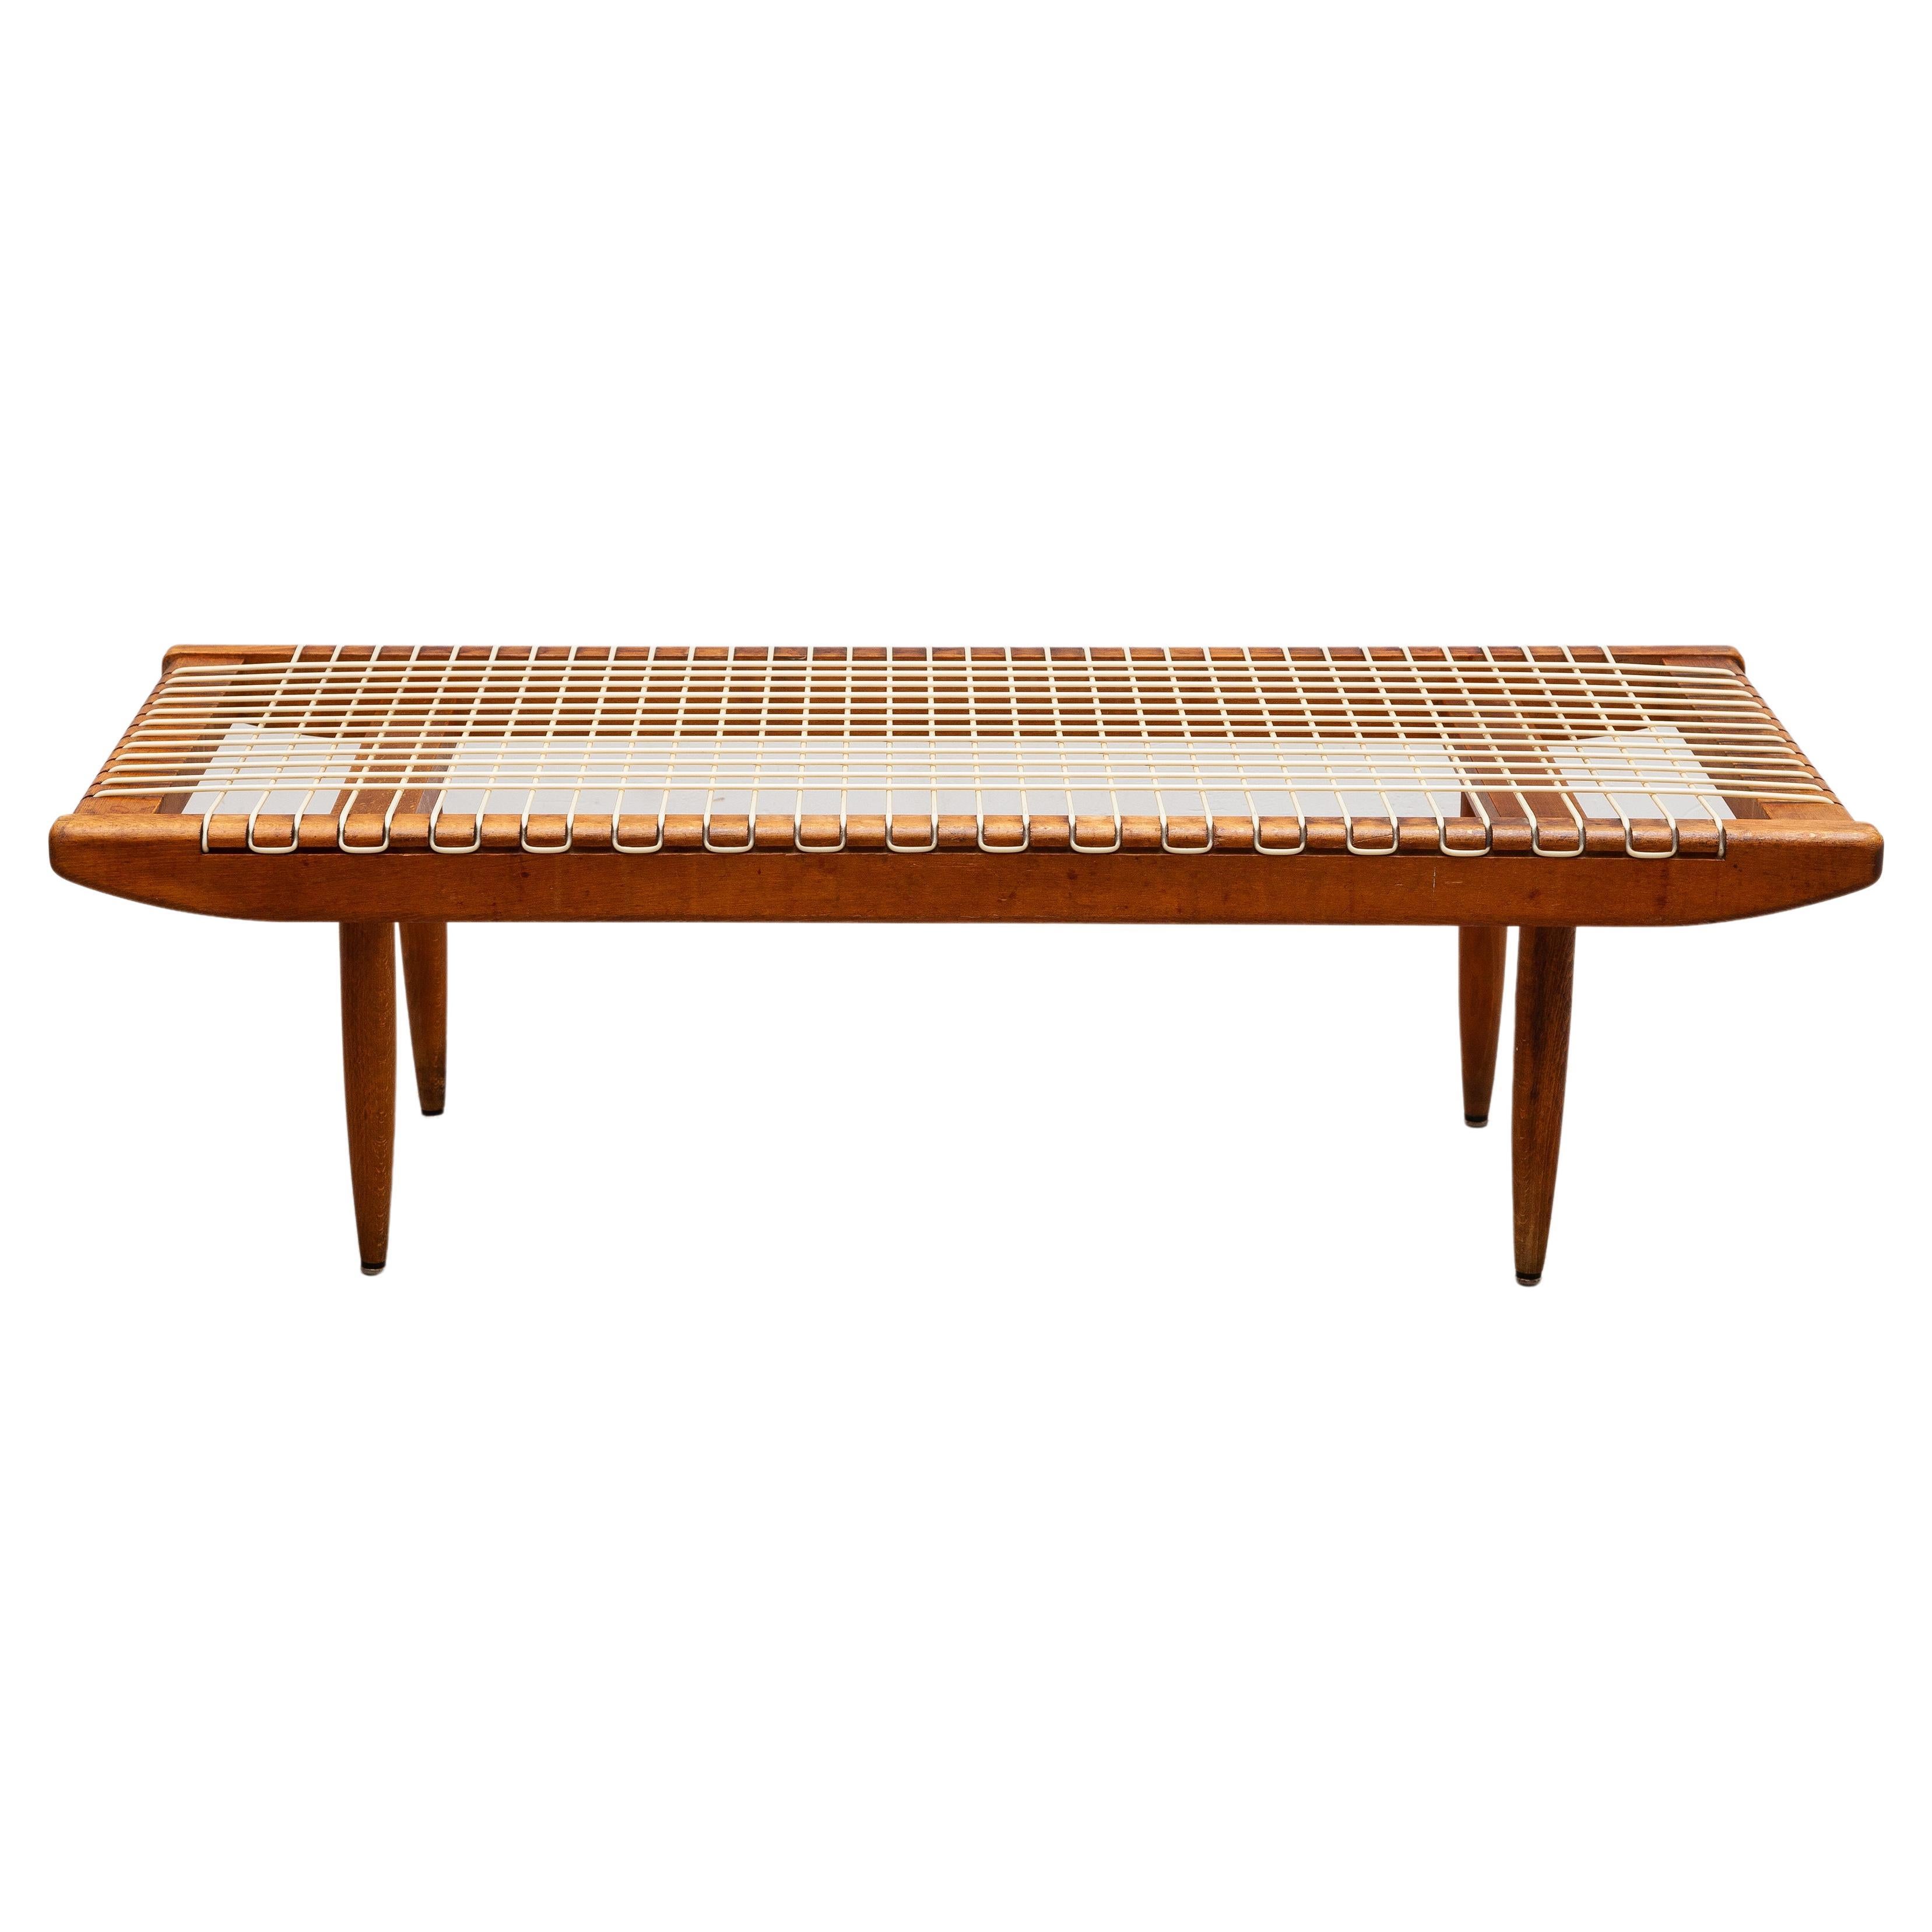 A rare decorative original coffee table designed by Georges Tigien for Pradera in the 1950s, France. Formed of solid teak and highly durable wire cable. The coffee-table is highly decorative and in original condition. The table works well as a side